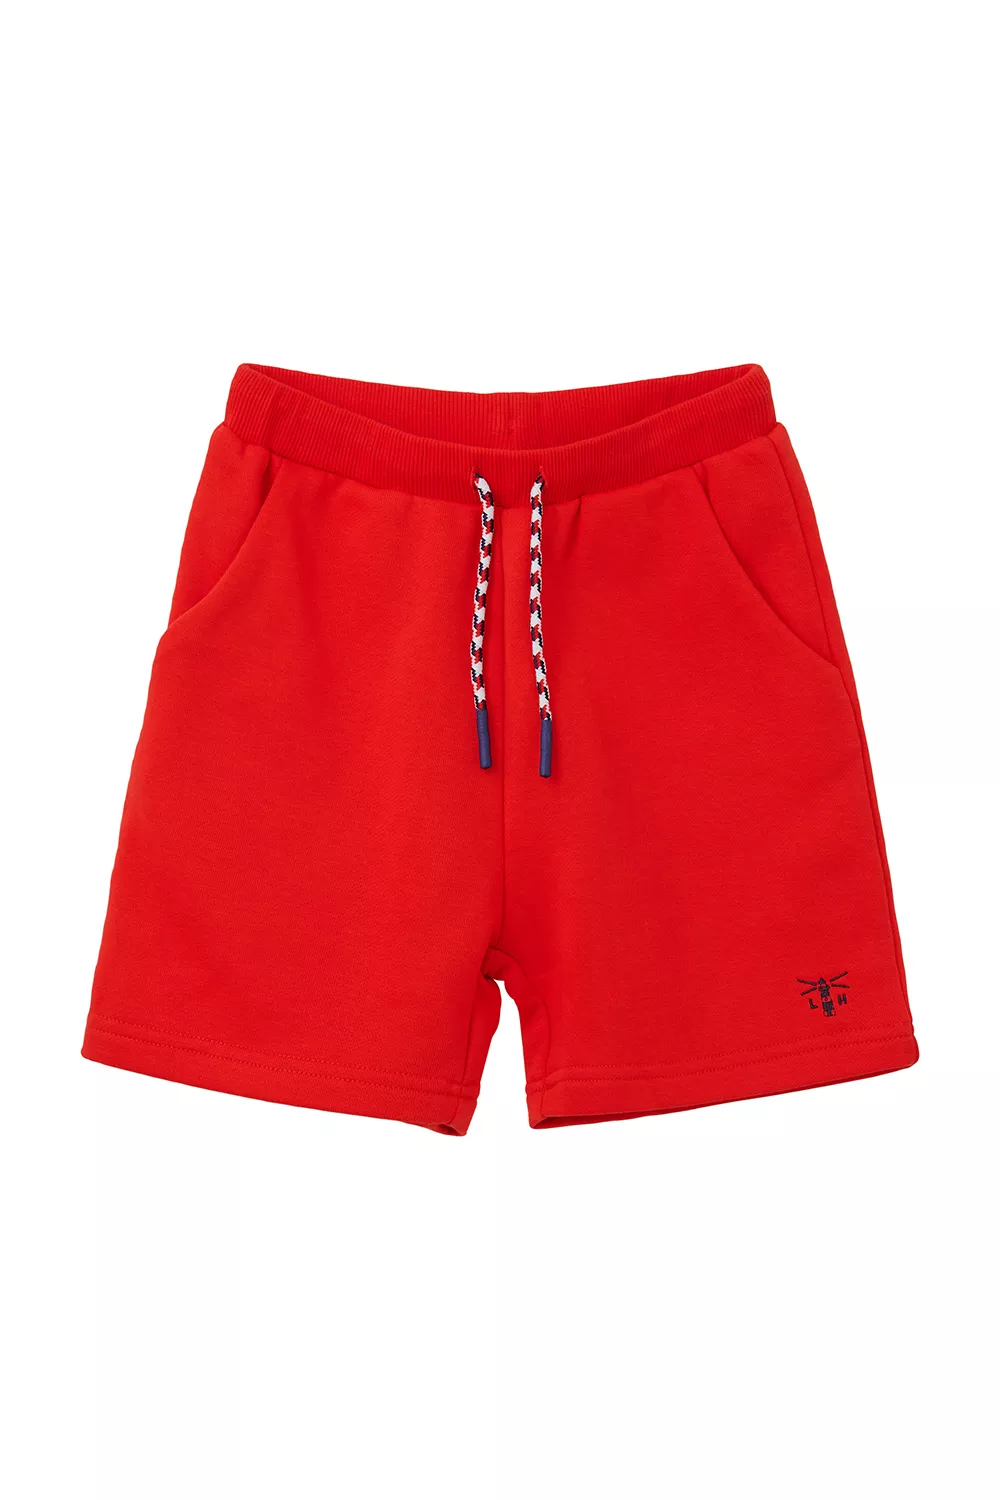 Louie Shorts Red 2-3yrs